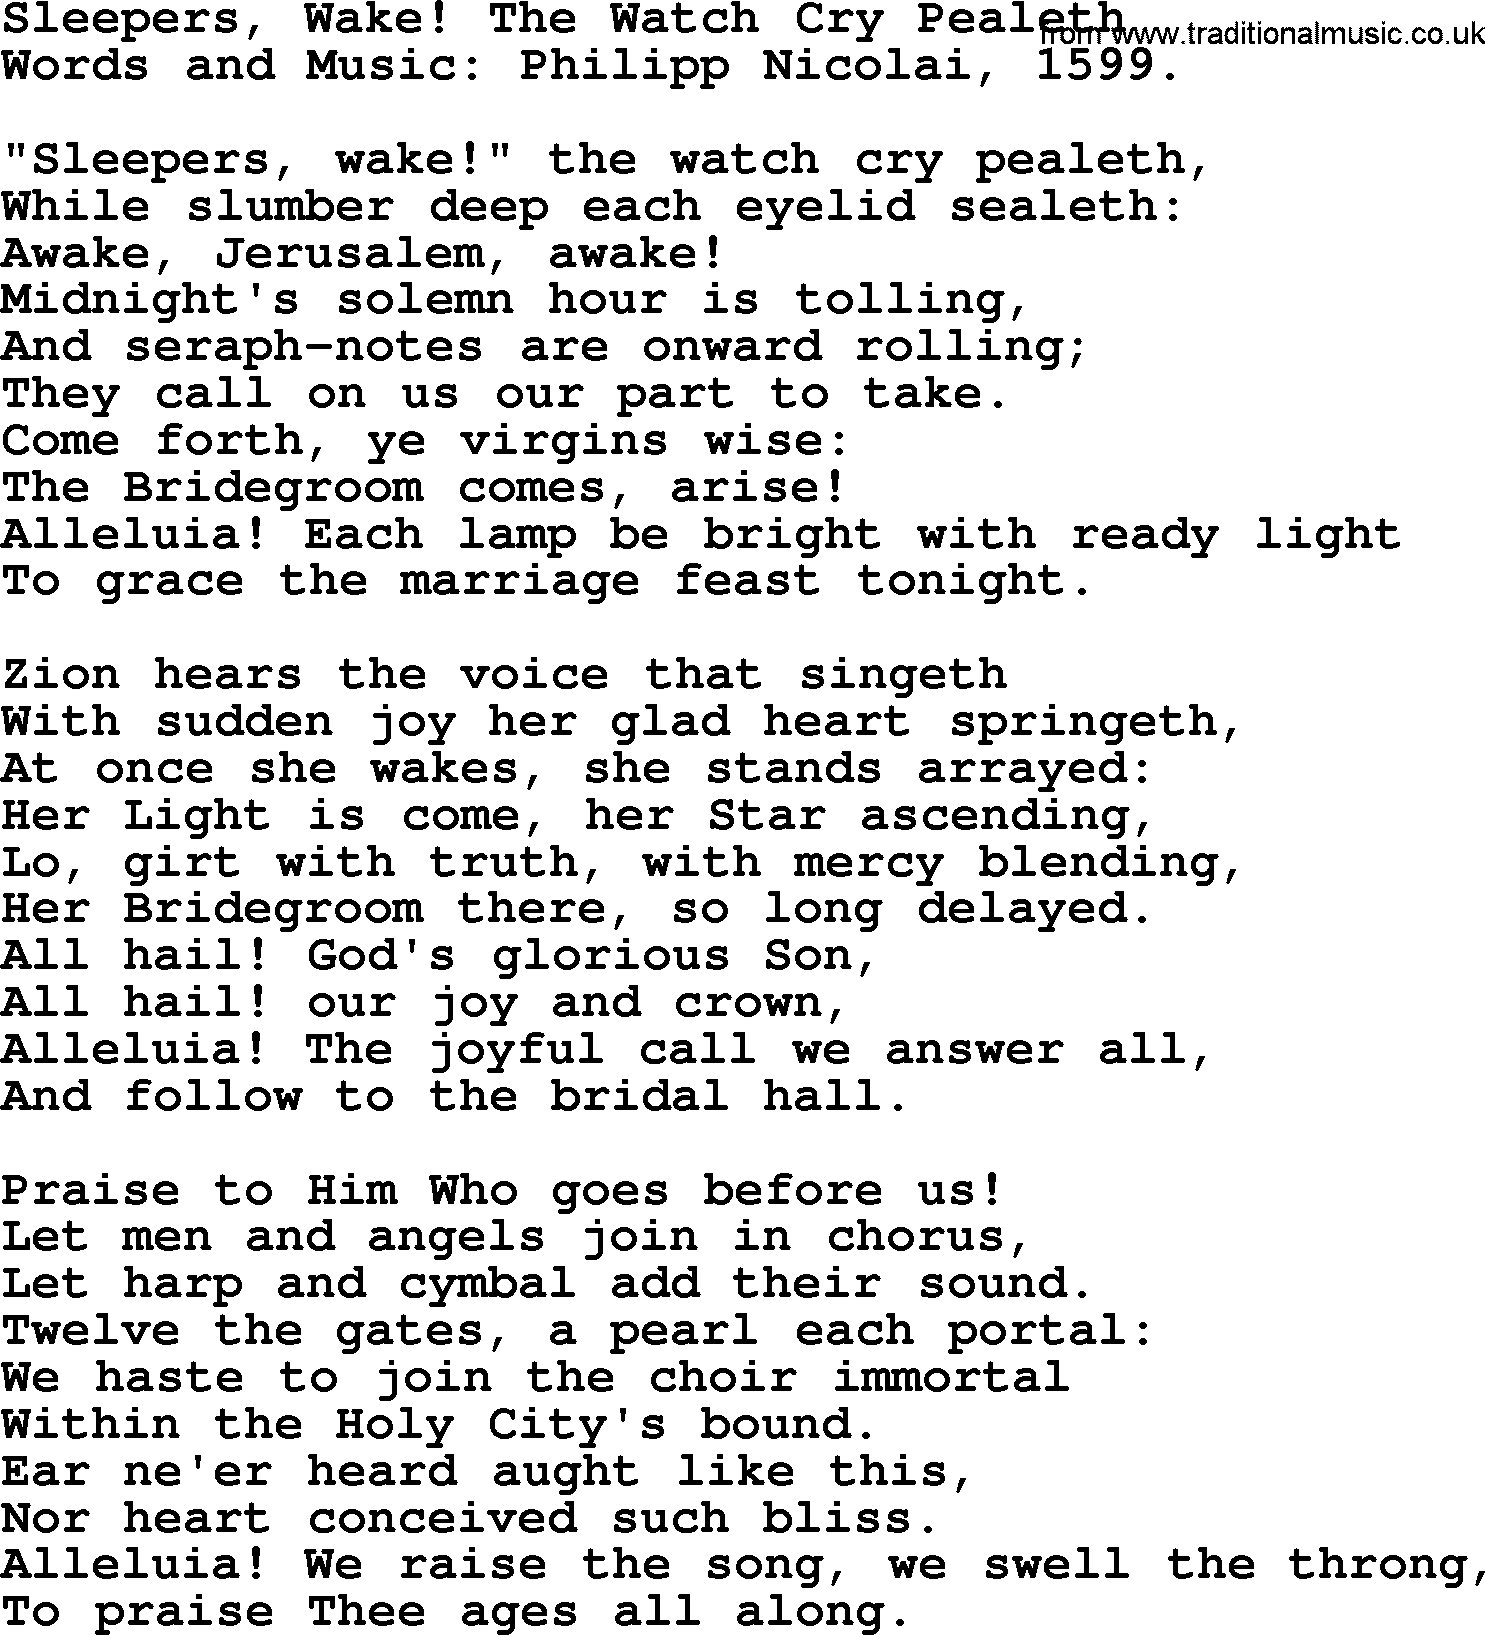 Philip Bliss Song: Sleepers, Wake! The Watch Cry Pealeth, lyrics